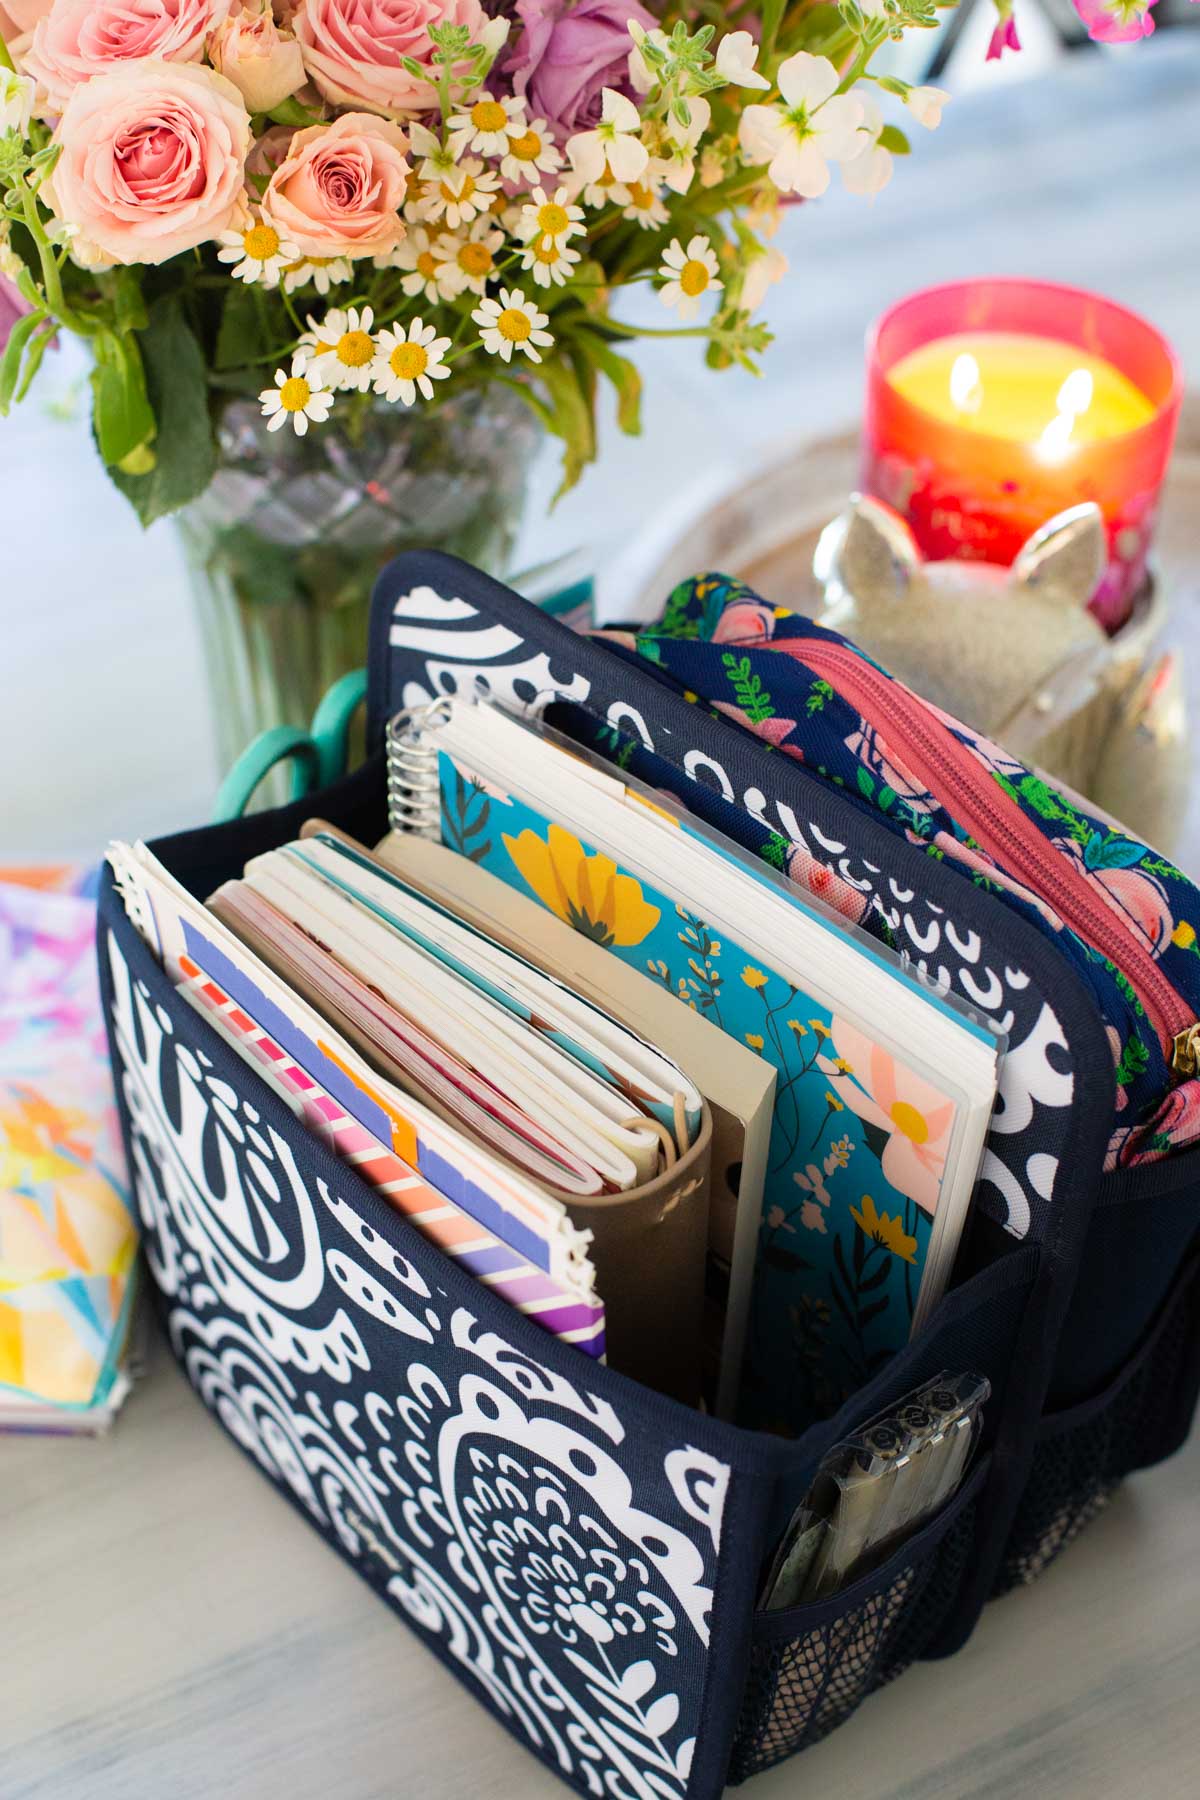 The basket is filled with the journals and planner and is sitting next to fresh flowers and a candle.